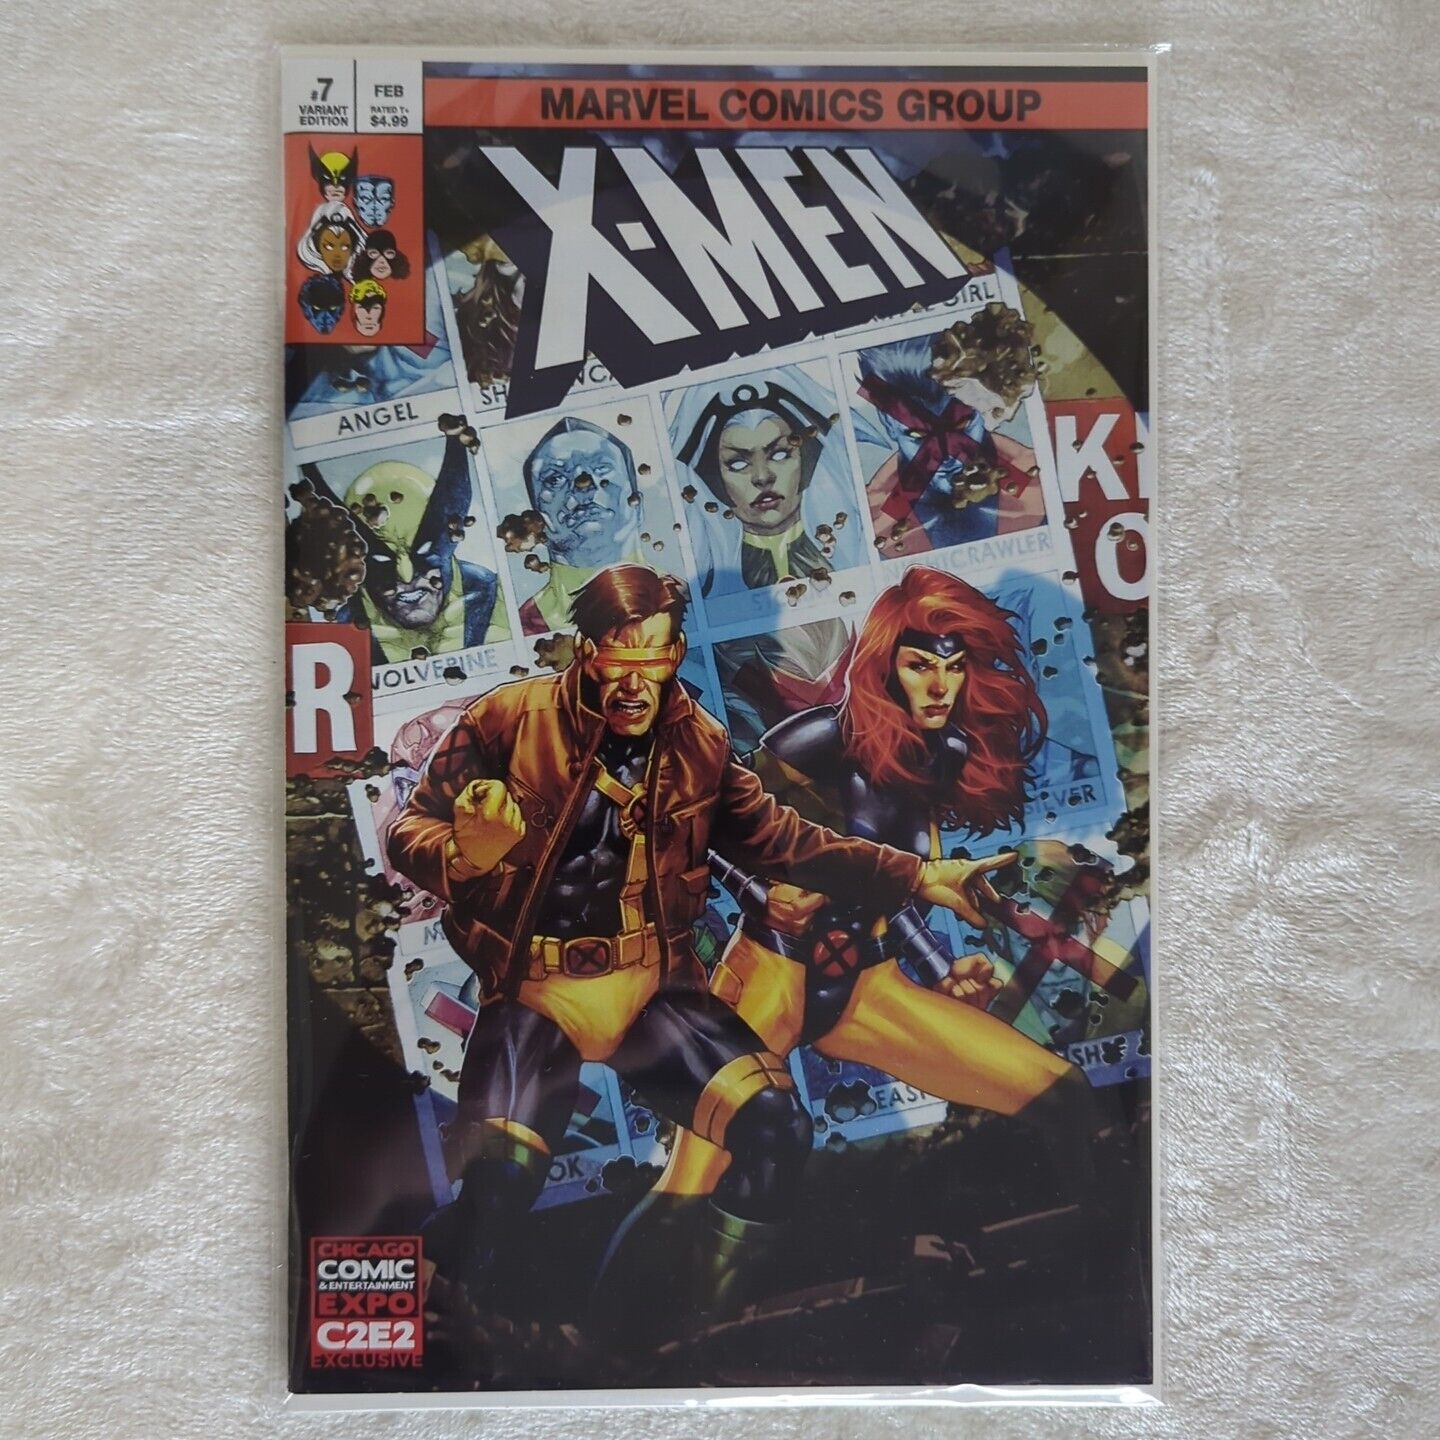 X-Men #7 Variant C2E2 Jay Anacleto Unknown Comics Con Exclusive Cover Marvel